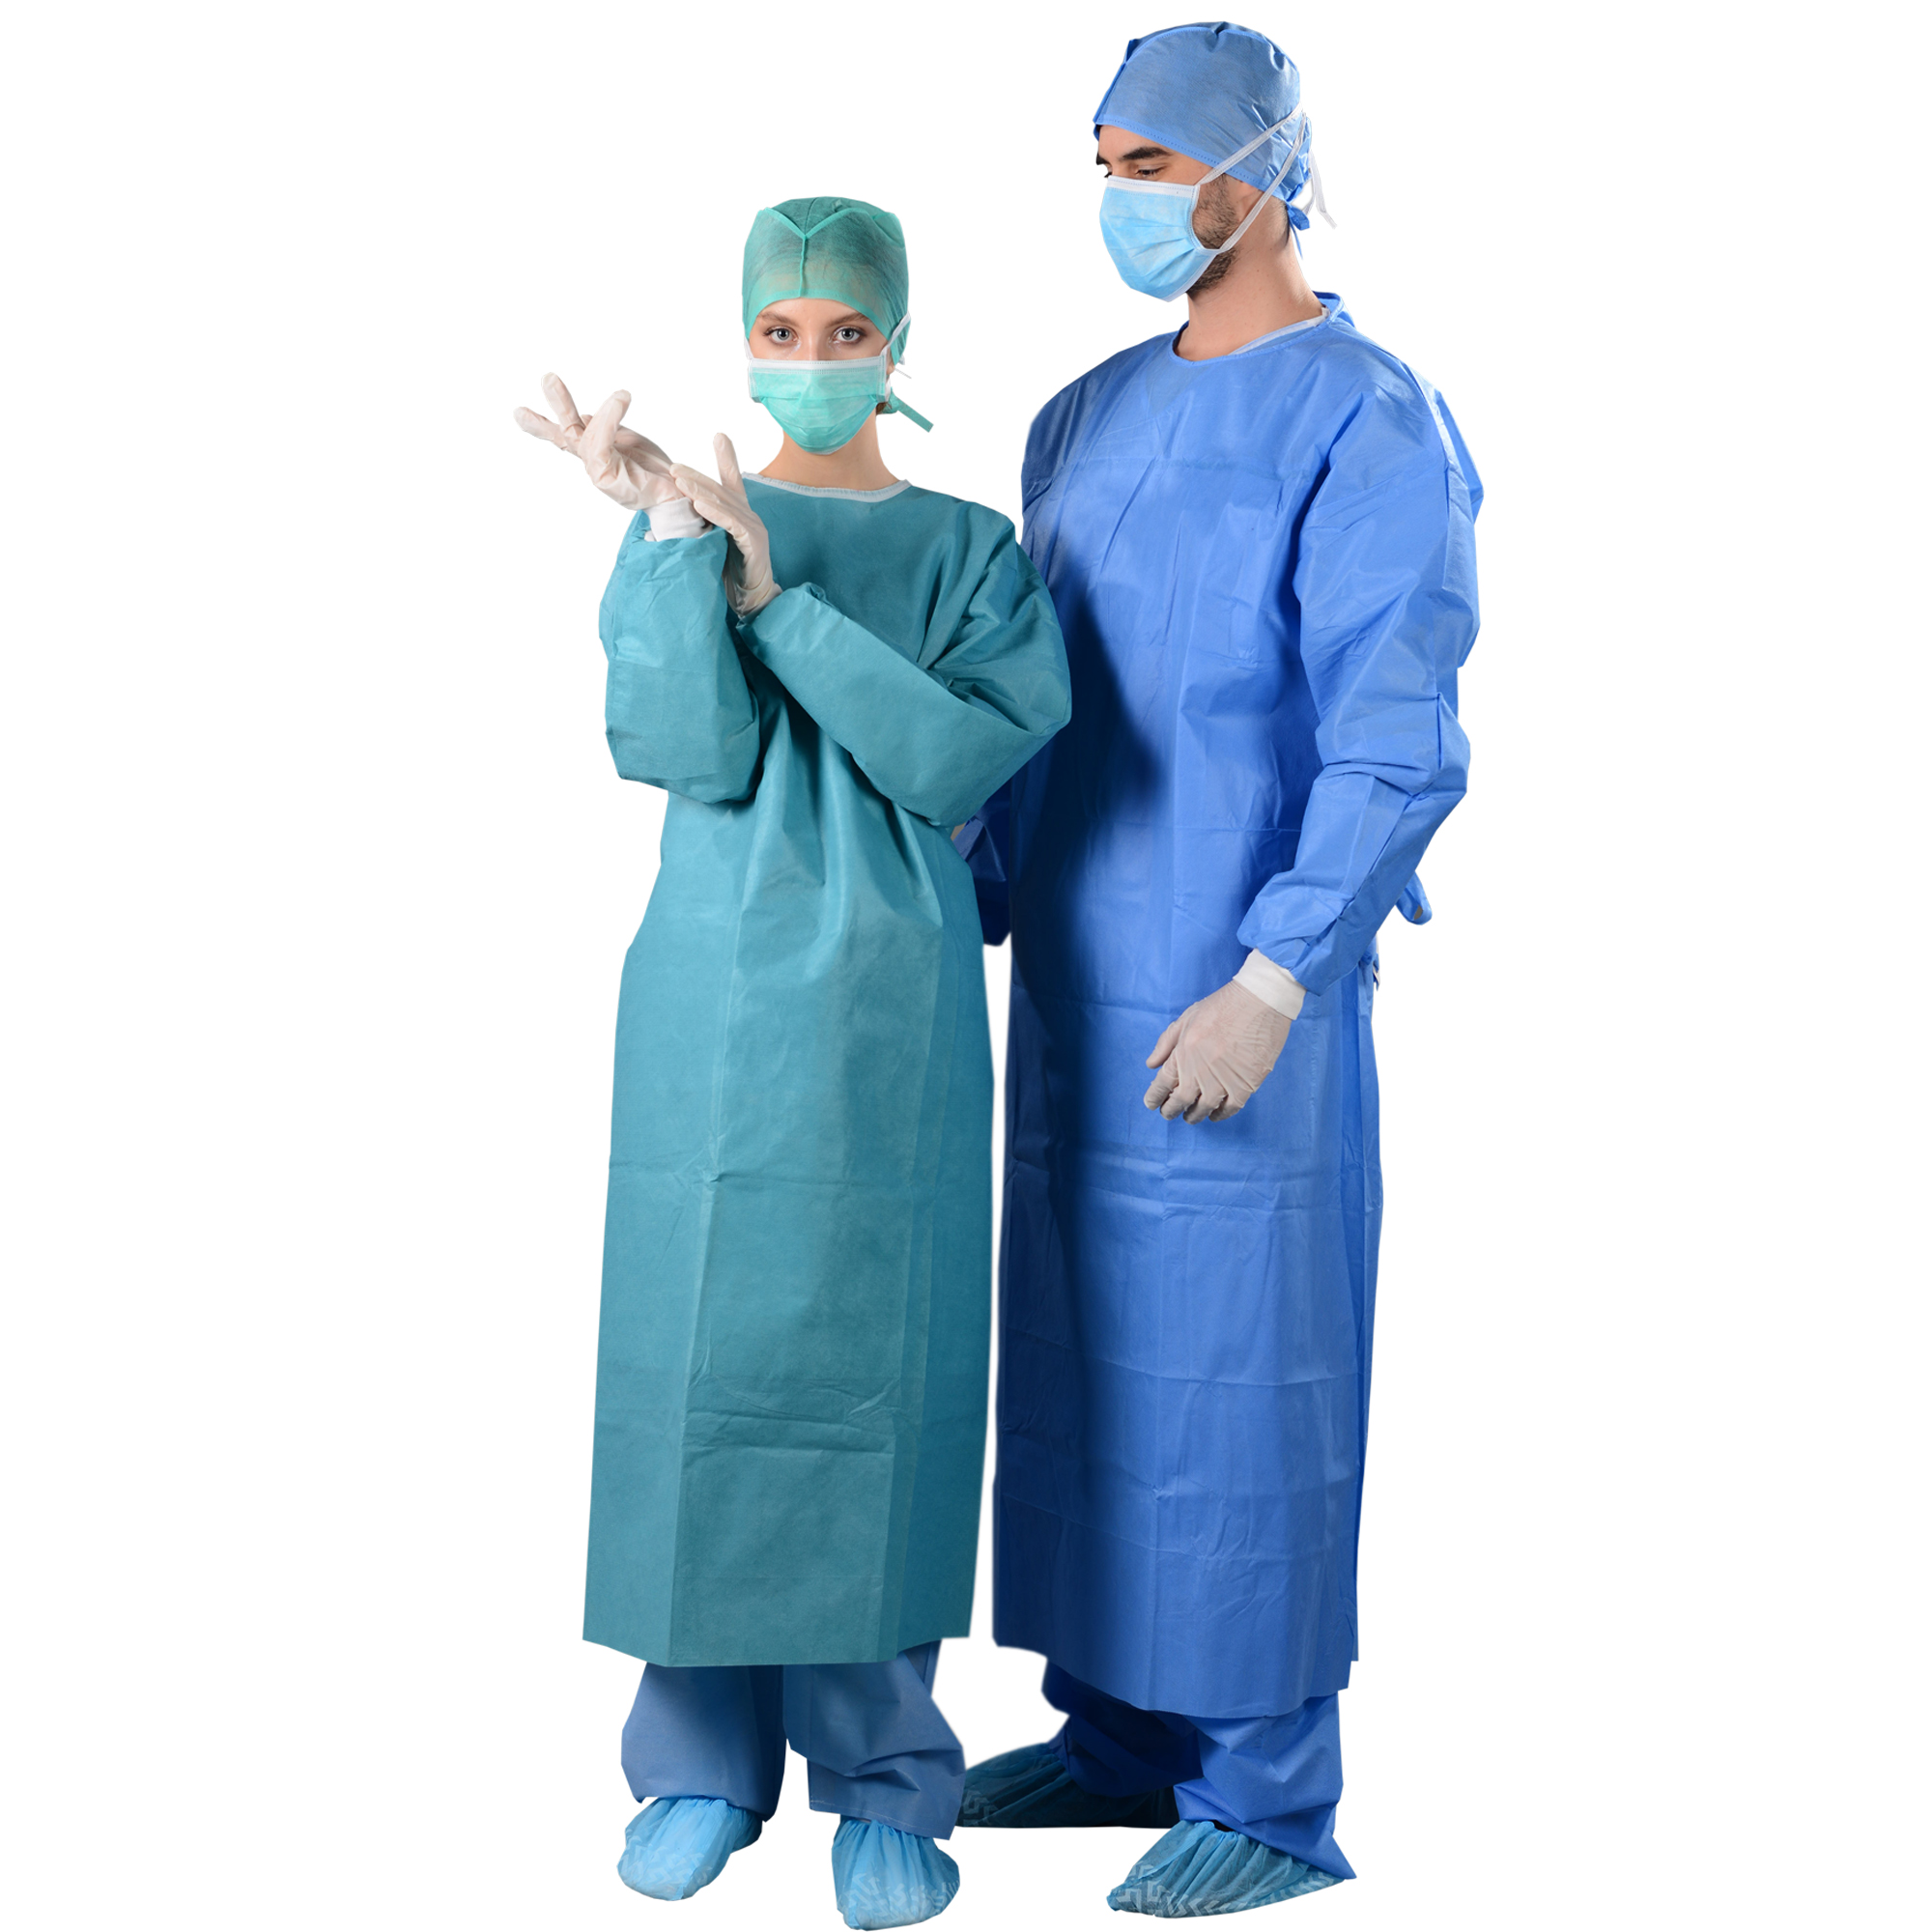 AAMI LEVEL 3 Disposable SMMS reinforced surgical gowns